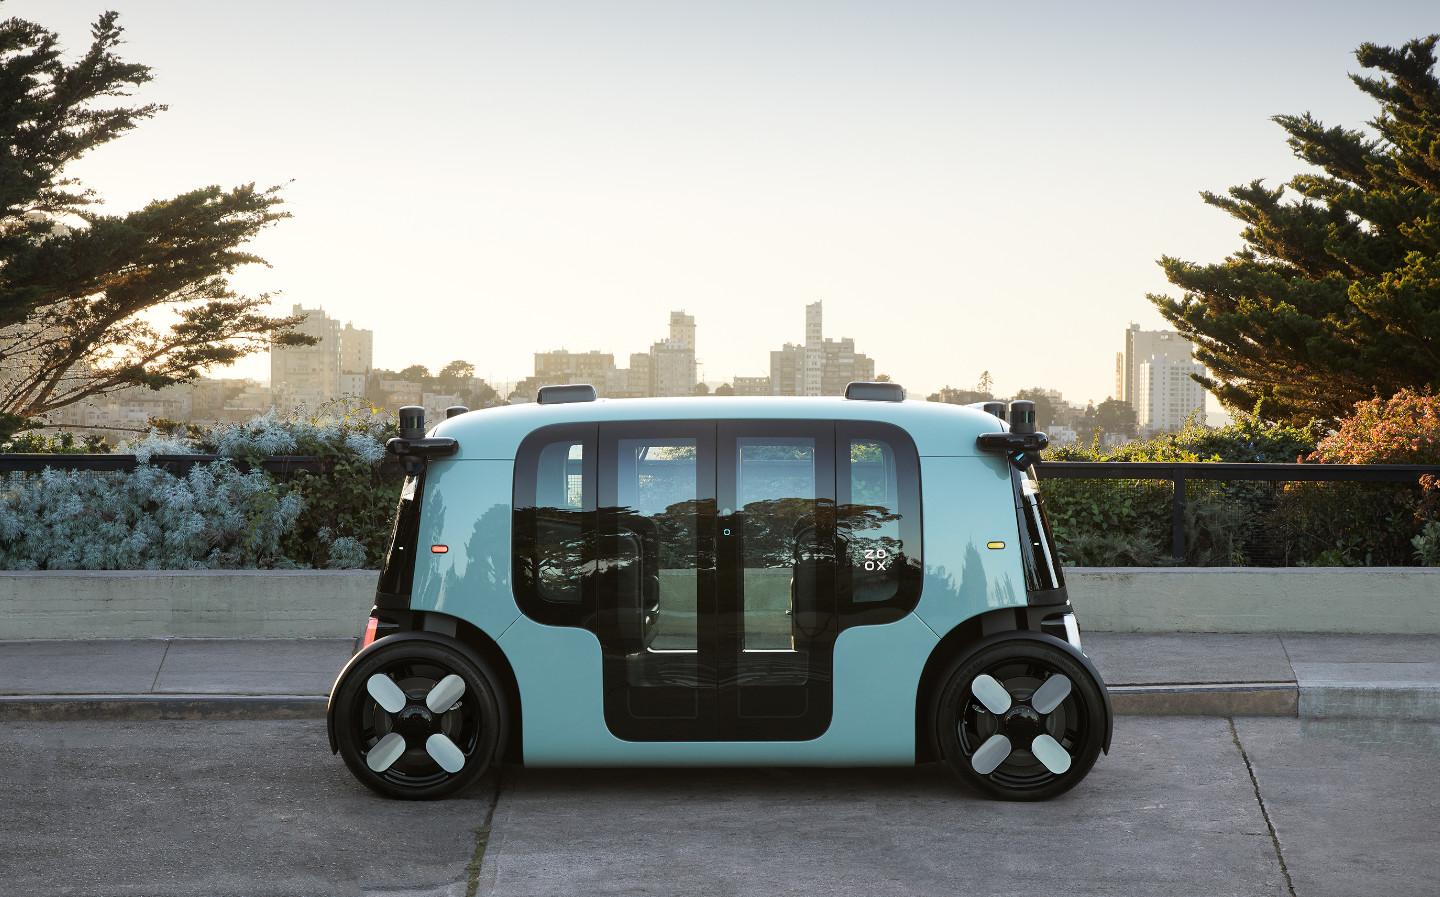 Amazon-owned Zoox unveils self-driving taxi